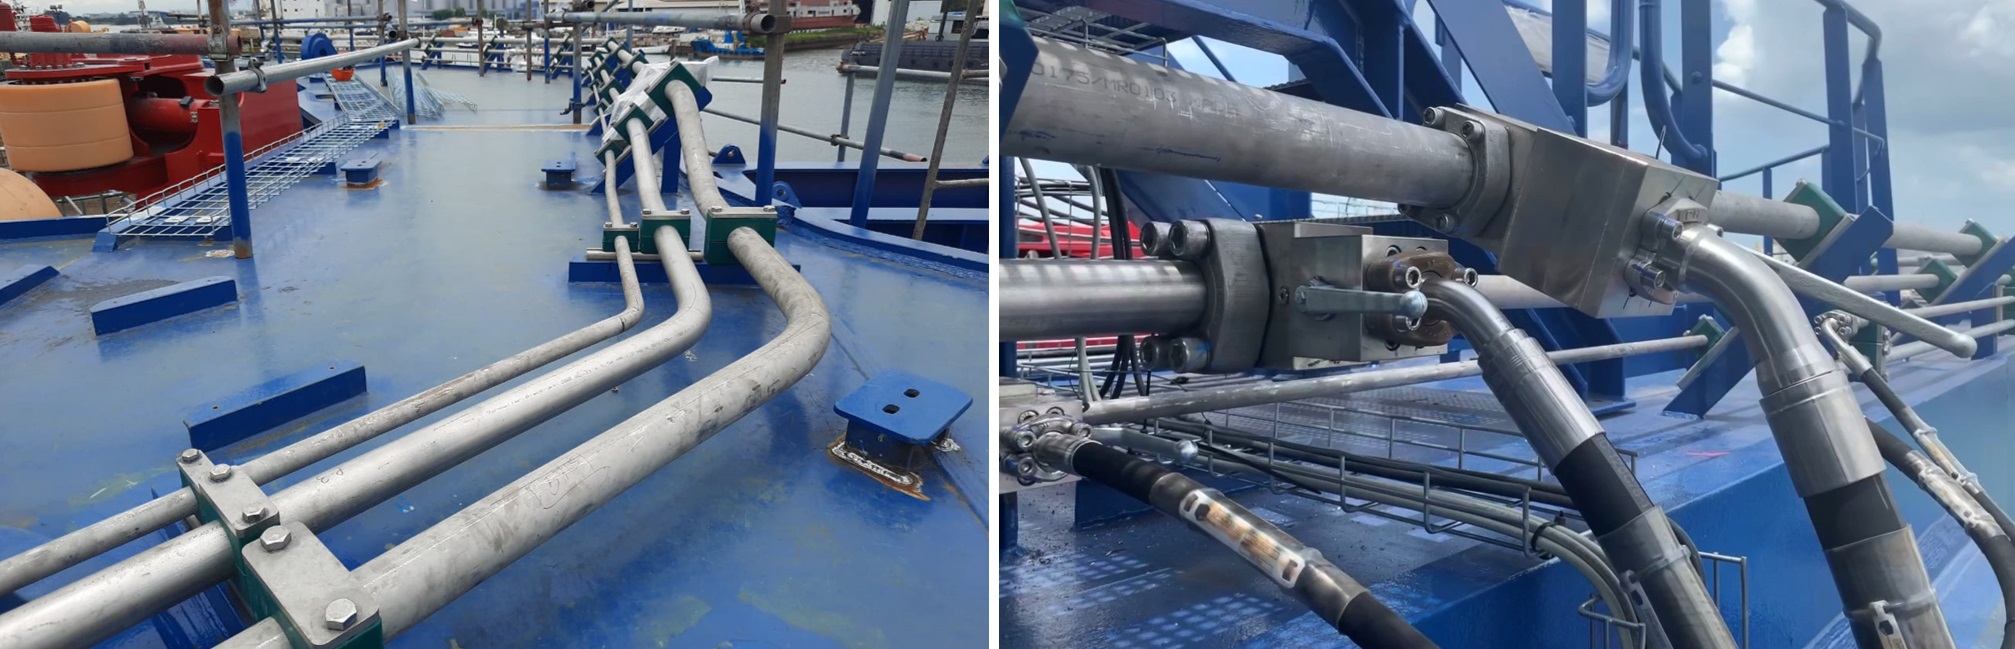 Piping connected to HPU pipes and piping connected to ball valves